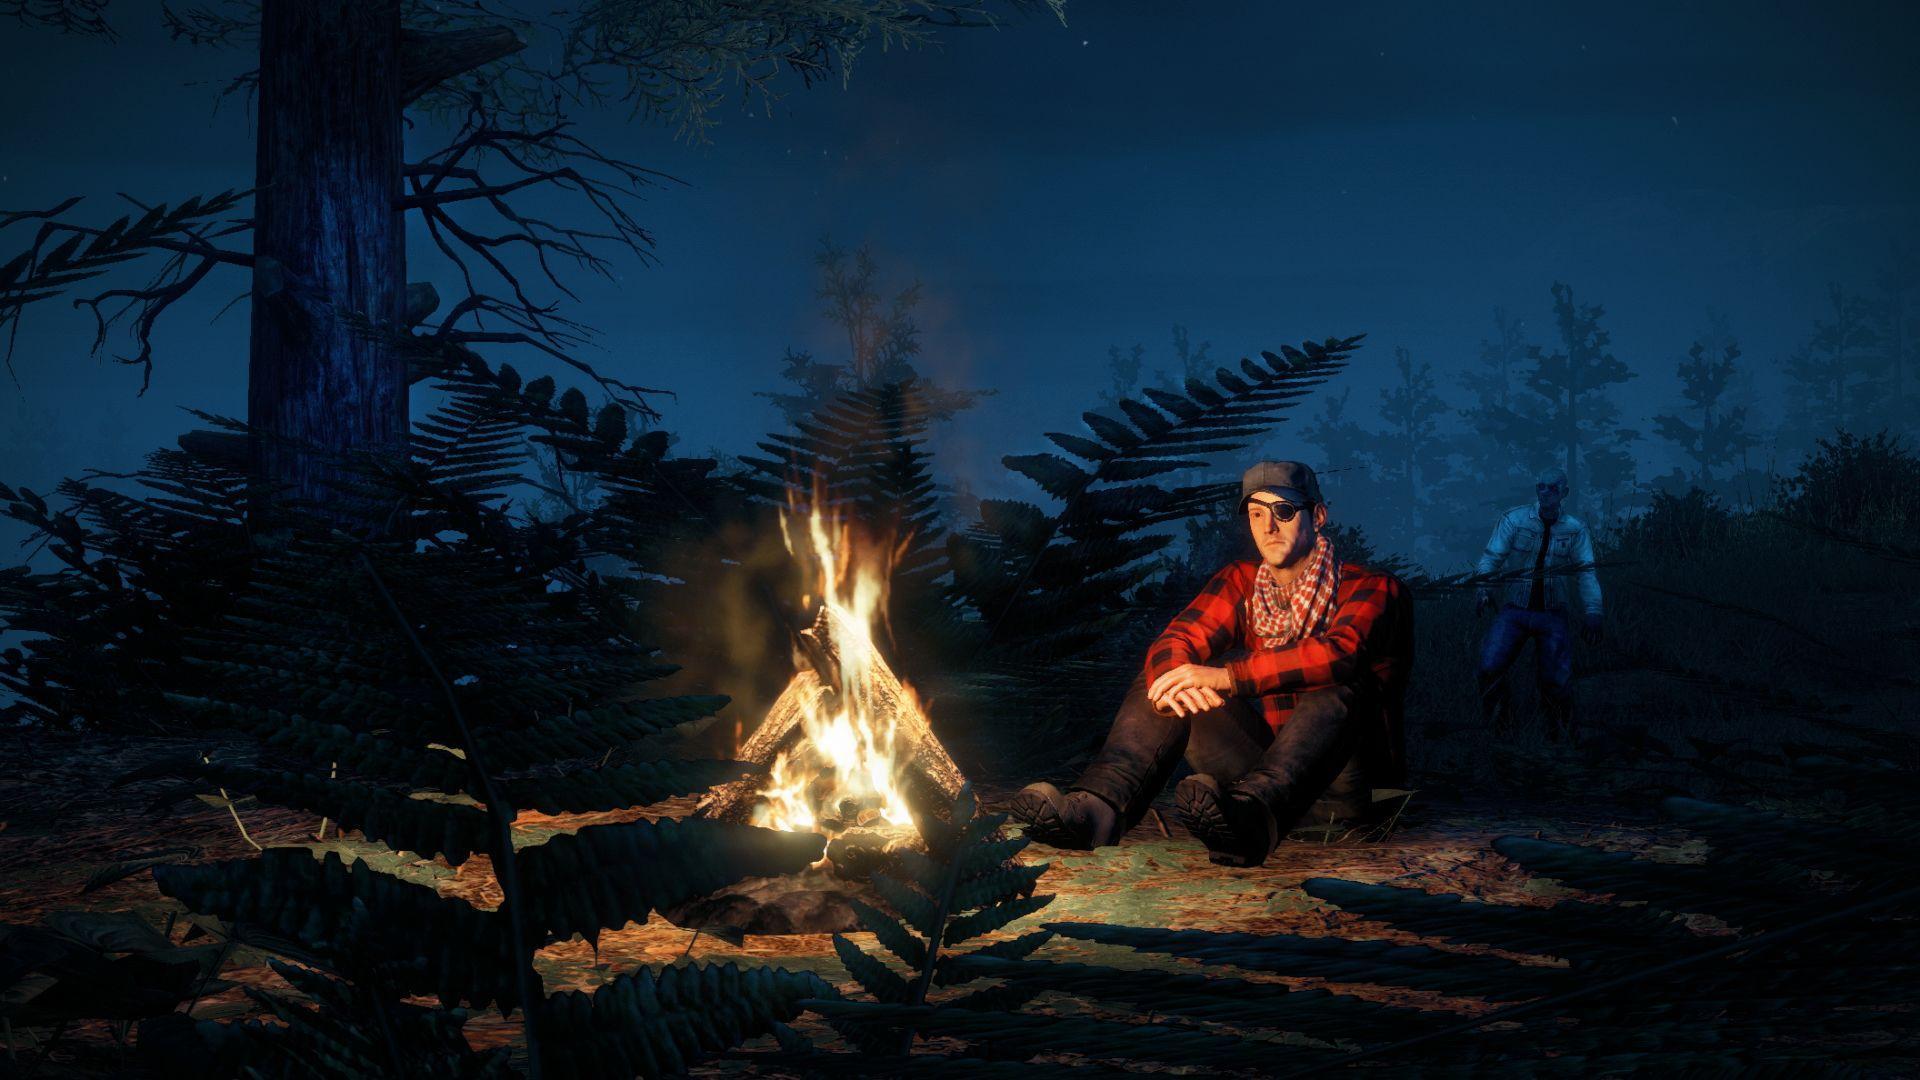 H1Z1 branching off into two separate games, 'H1Z1: Just Survive.